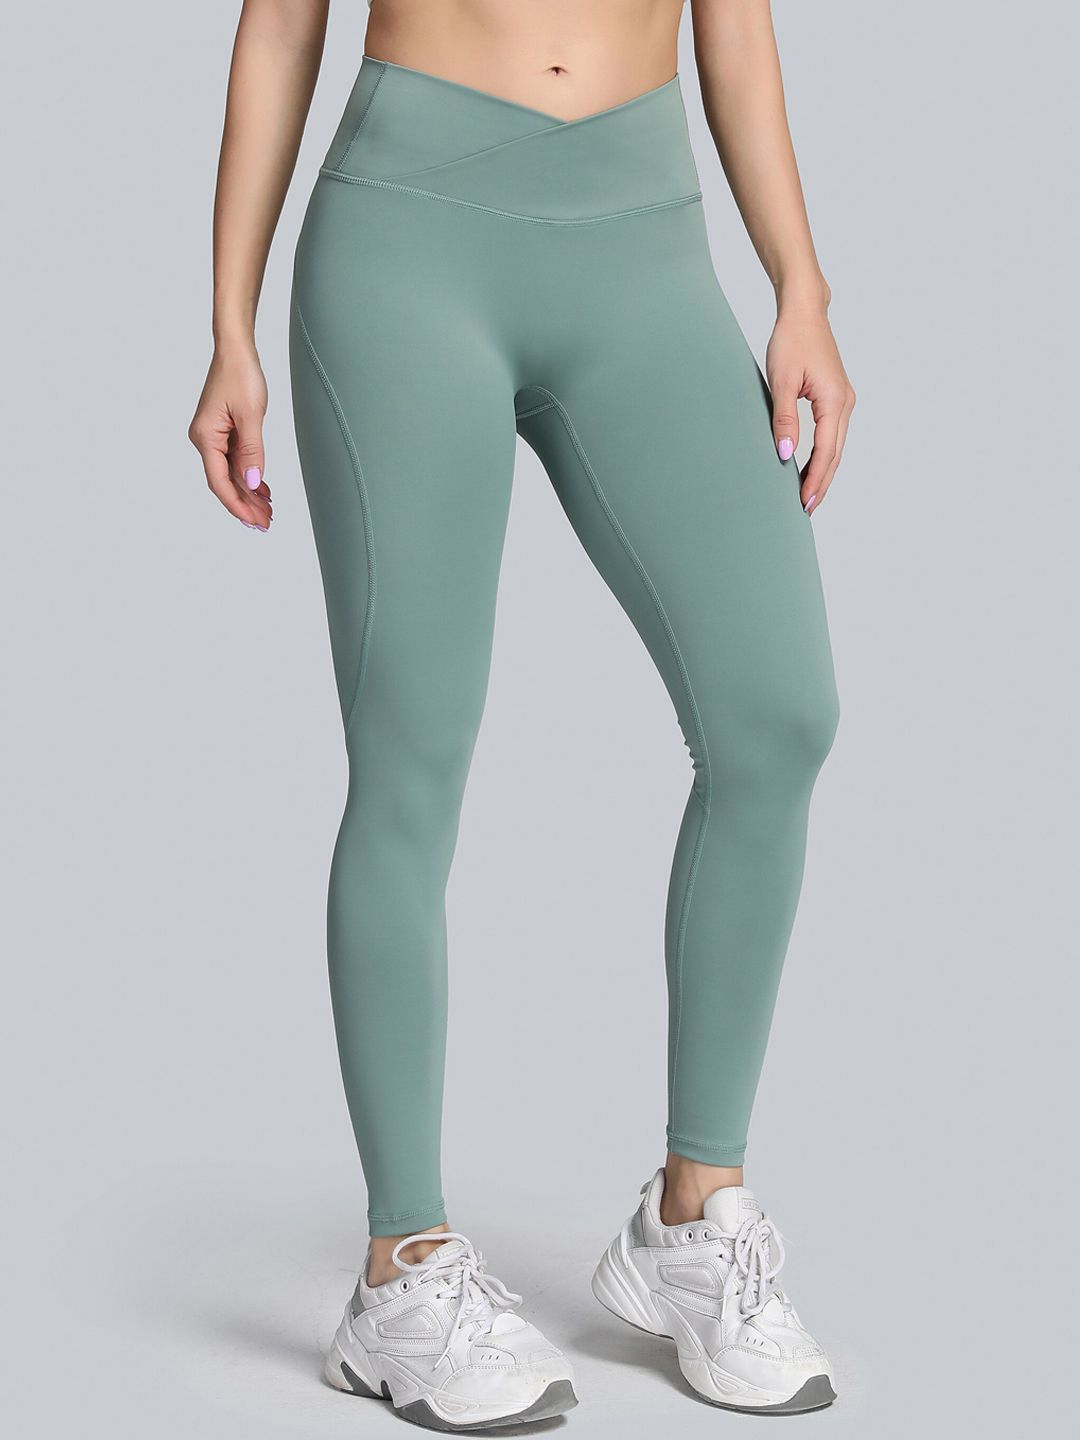 URBANIC Women Green Solid Ankle Length Gym Tights Price in India